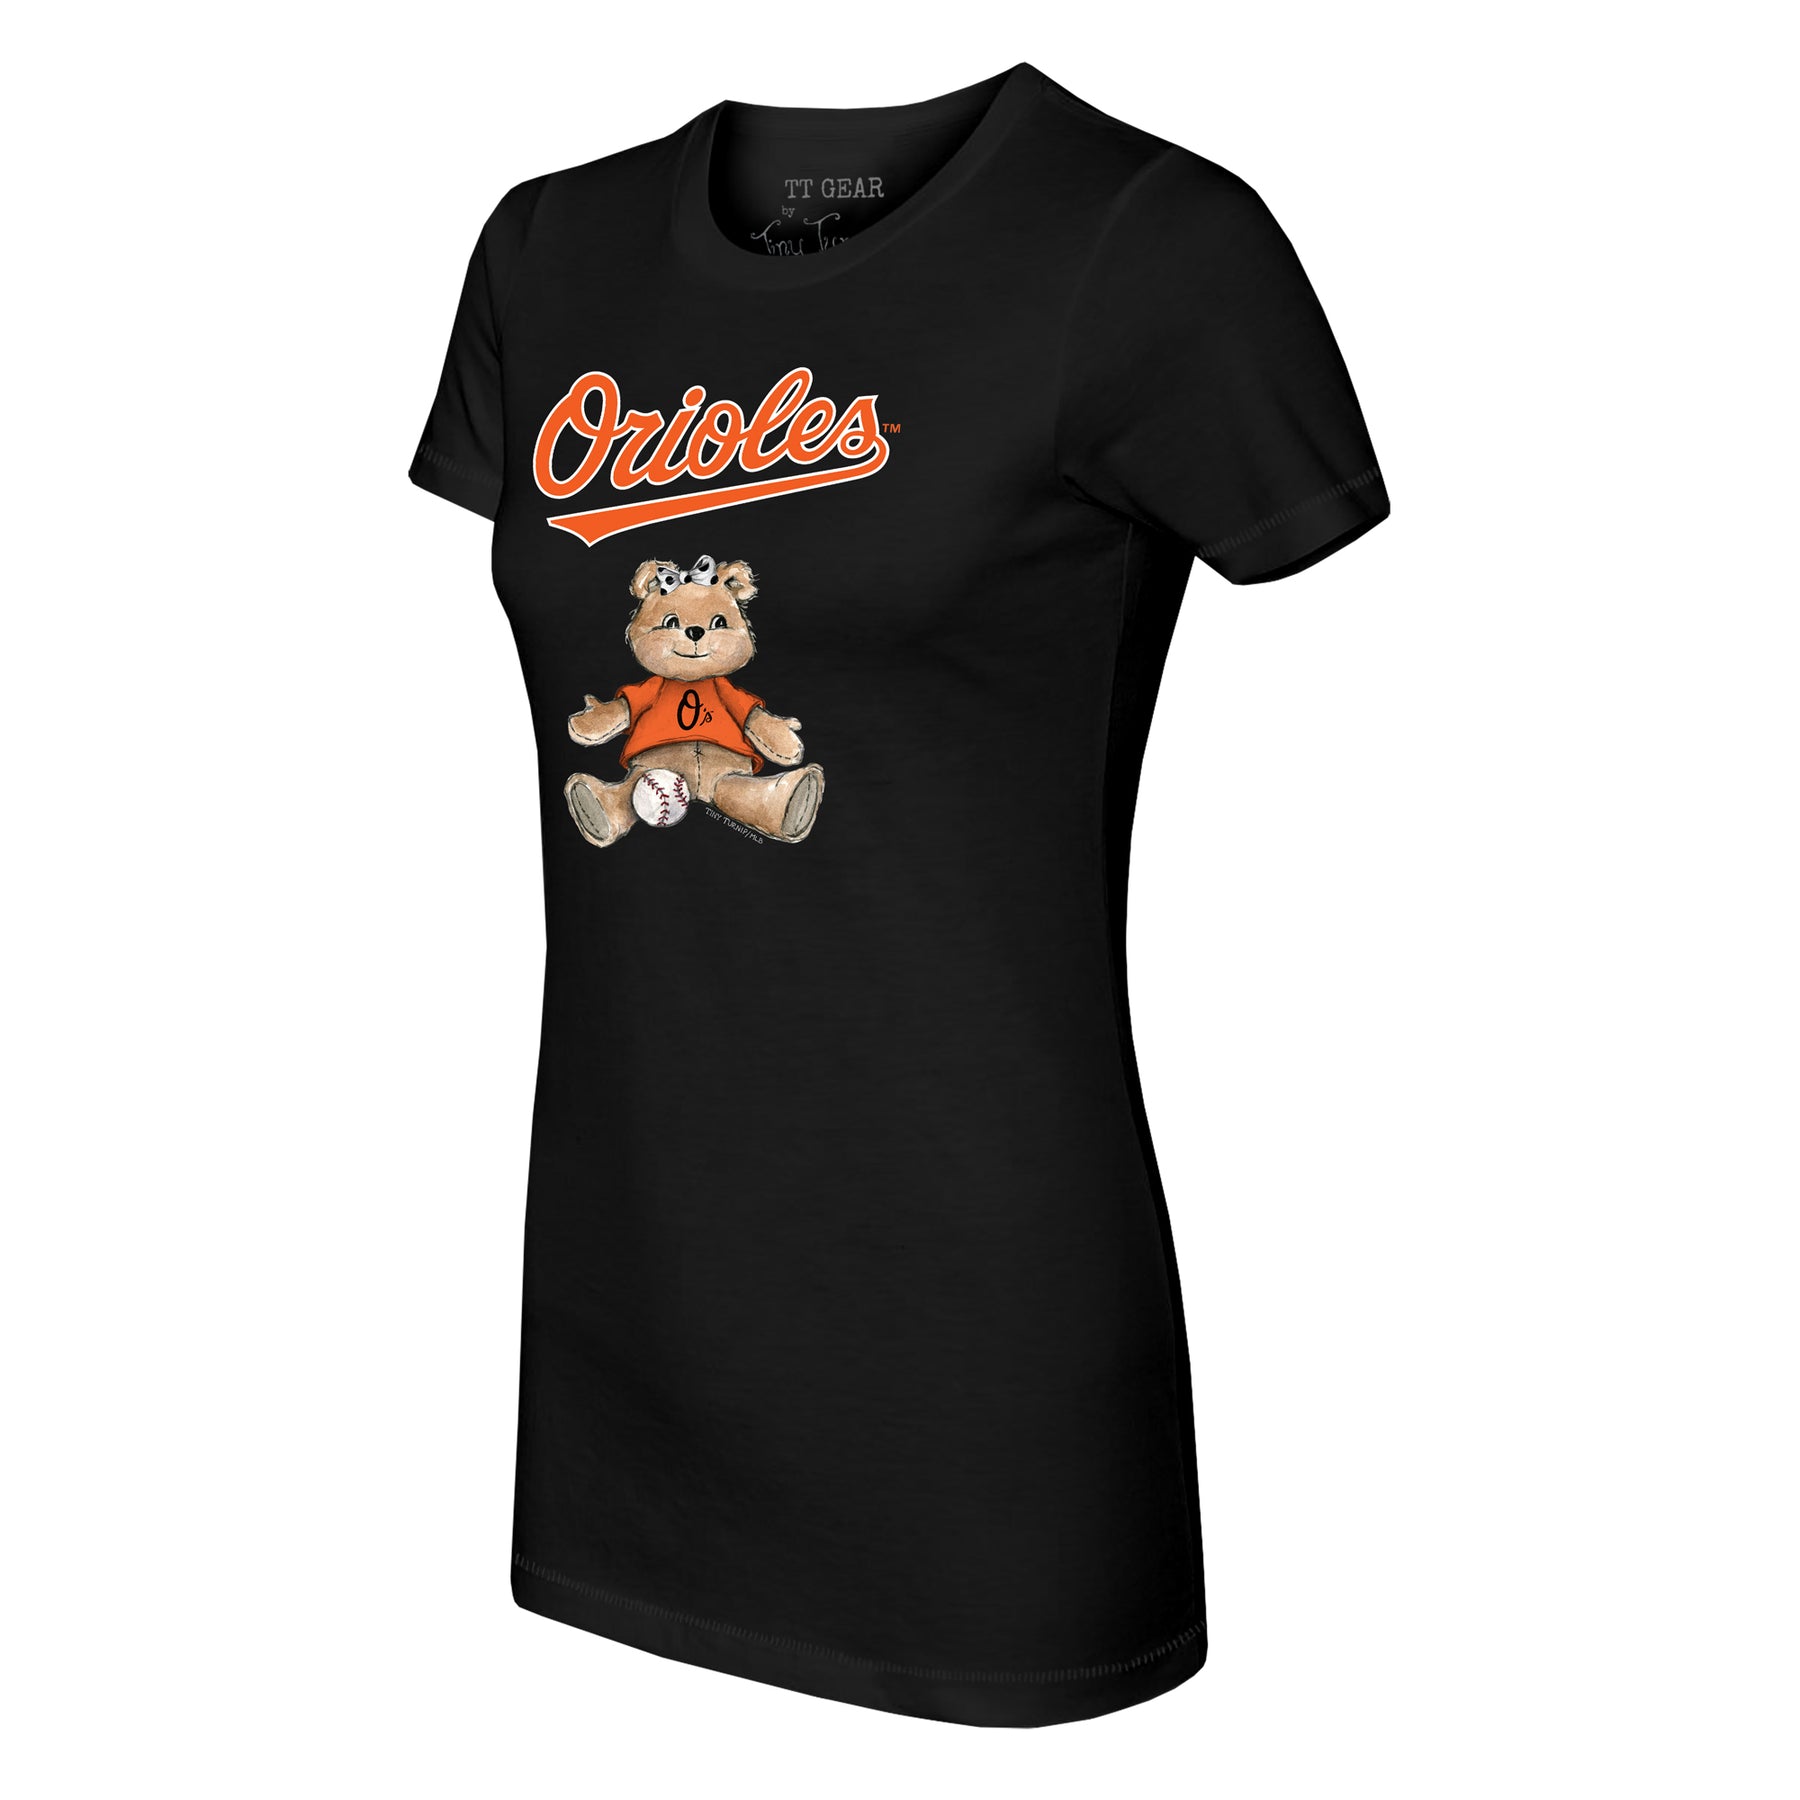 Baltimore Orioles Girl Teddy Tee Shirt Youth Large (10-12) / Black